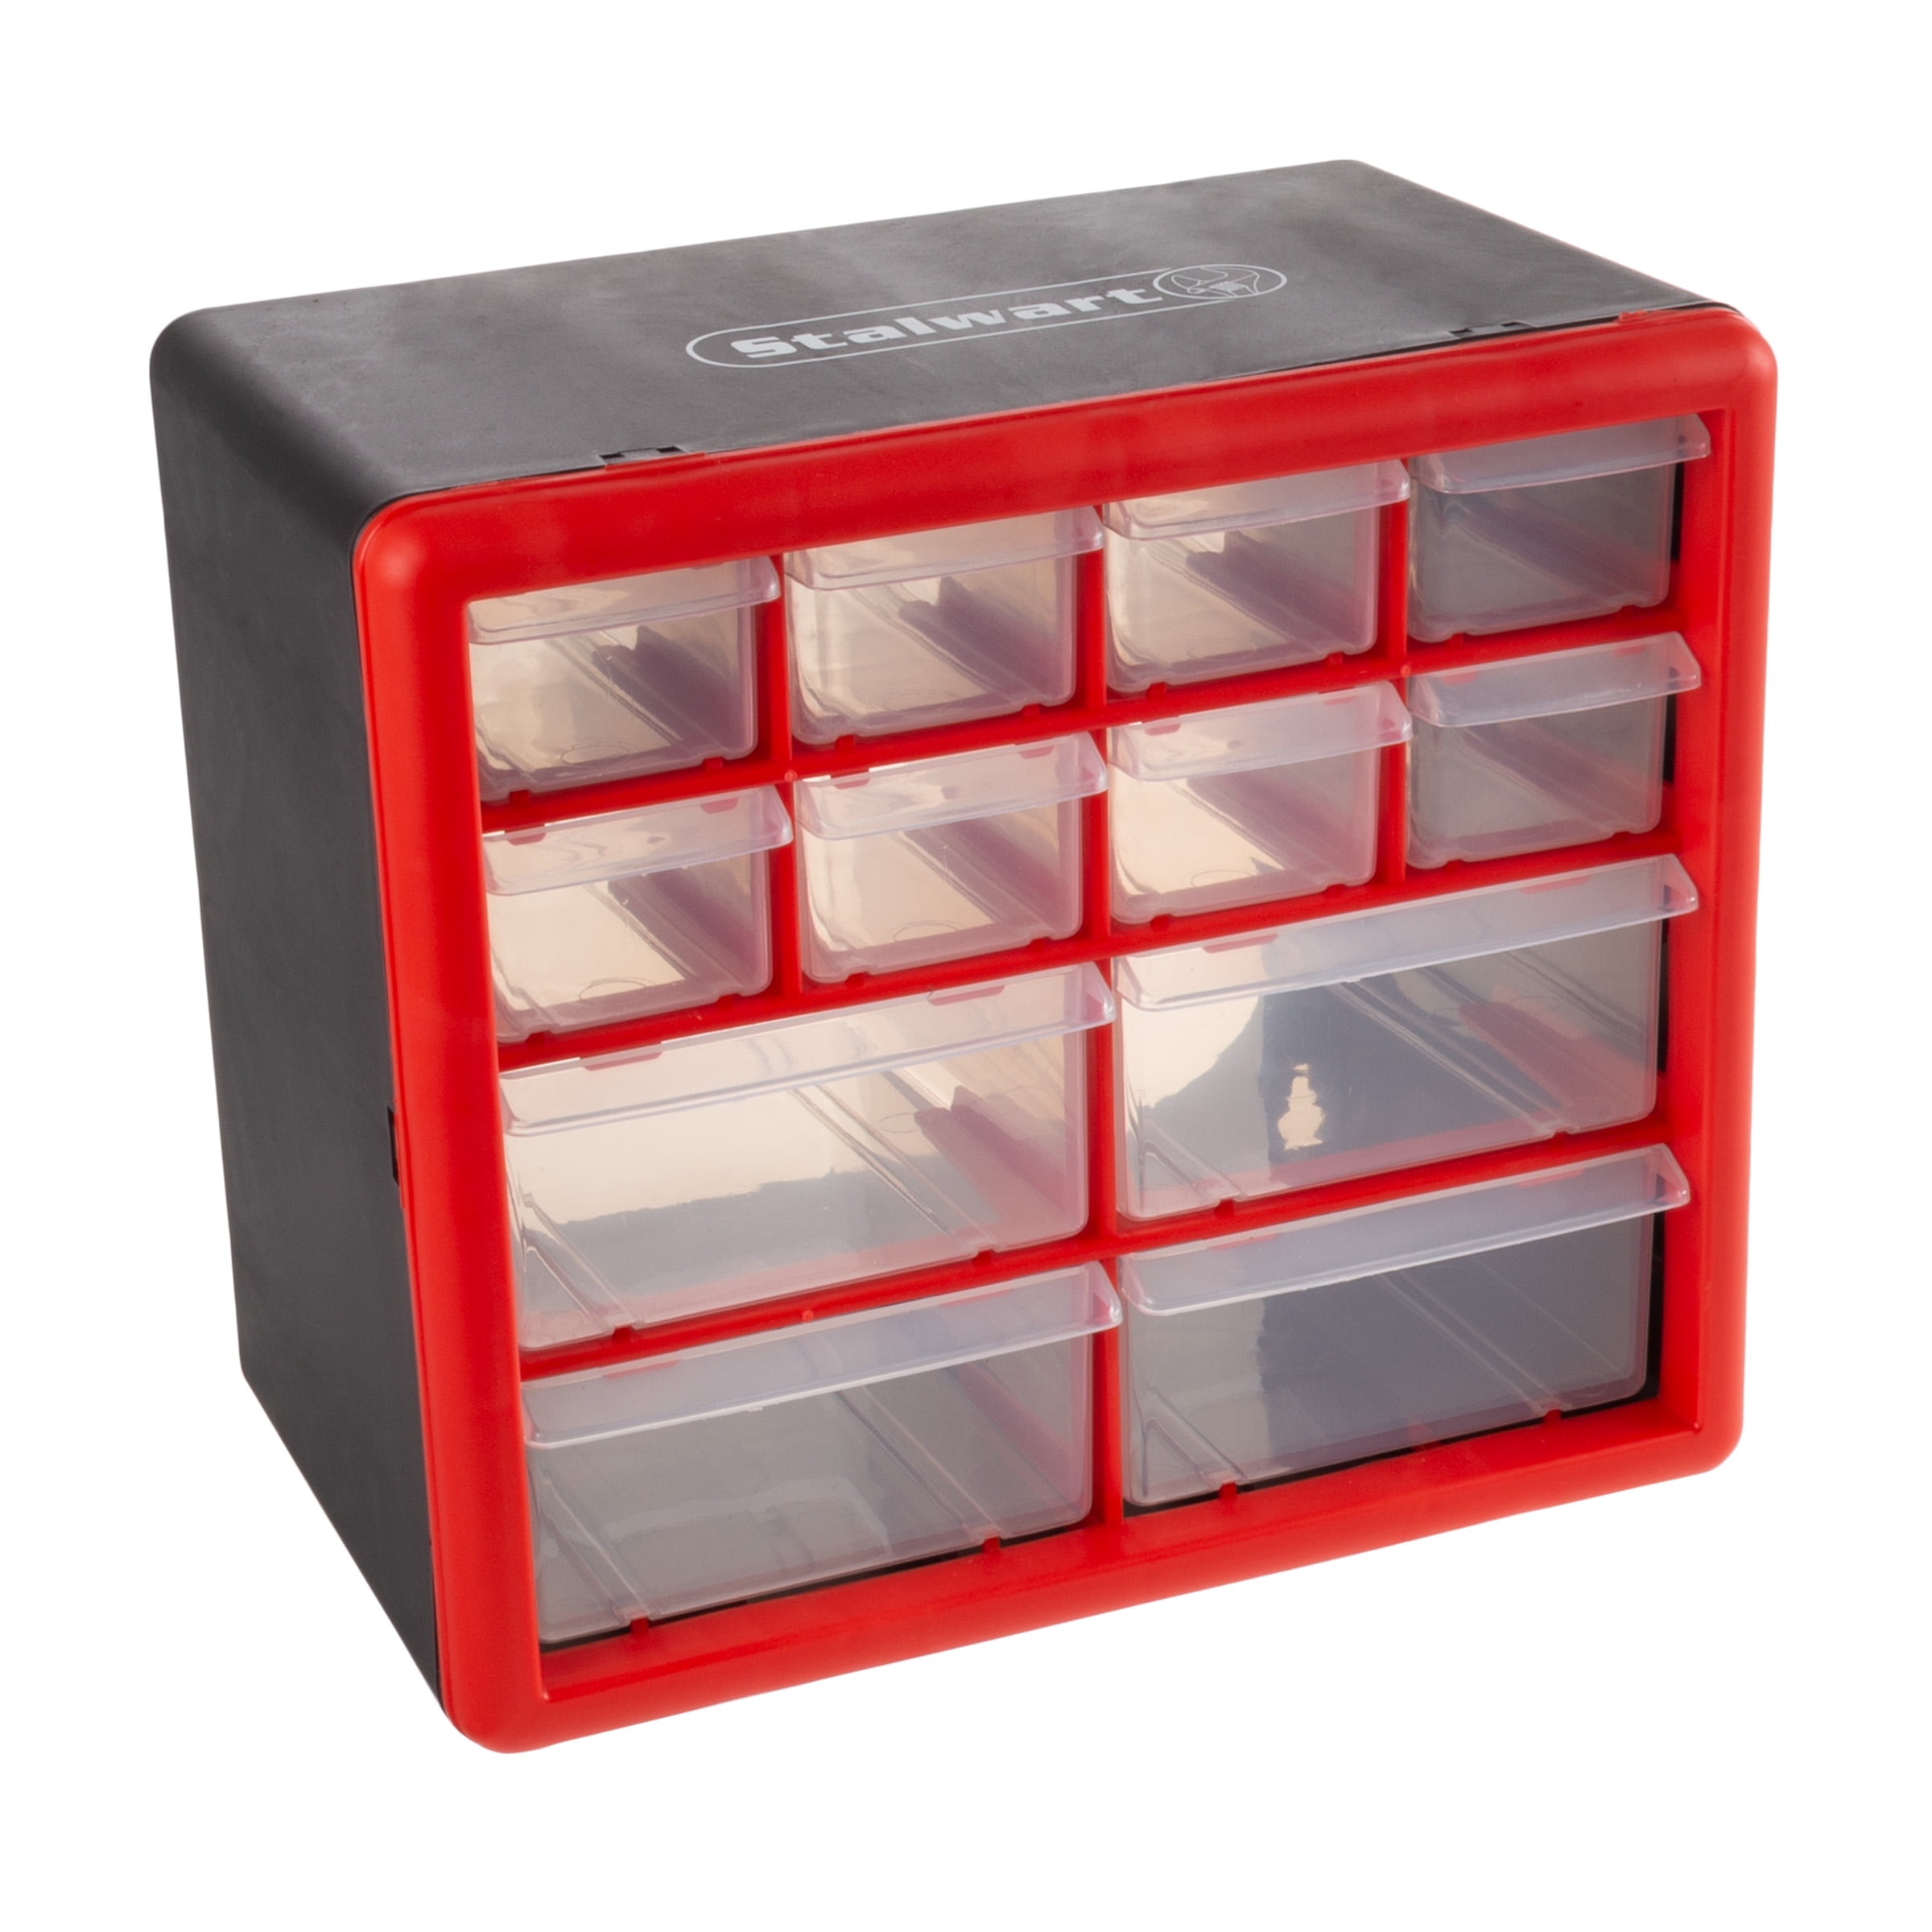 Stalwart 12-Compartment Organizer for Home or Office